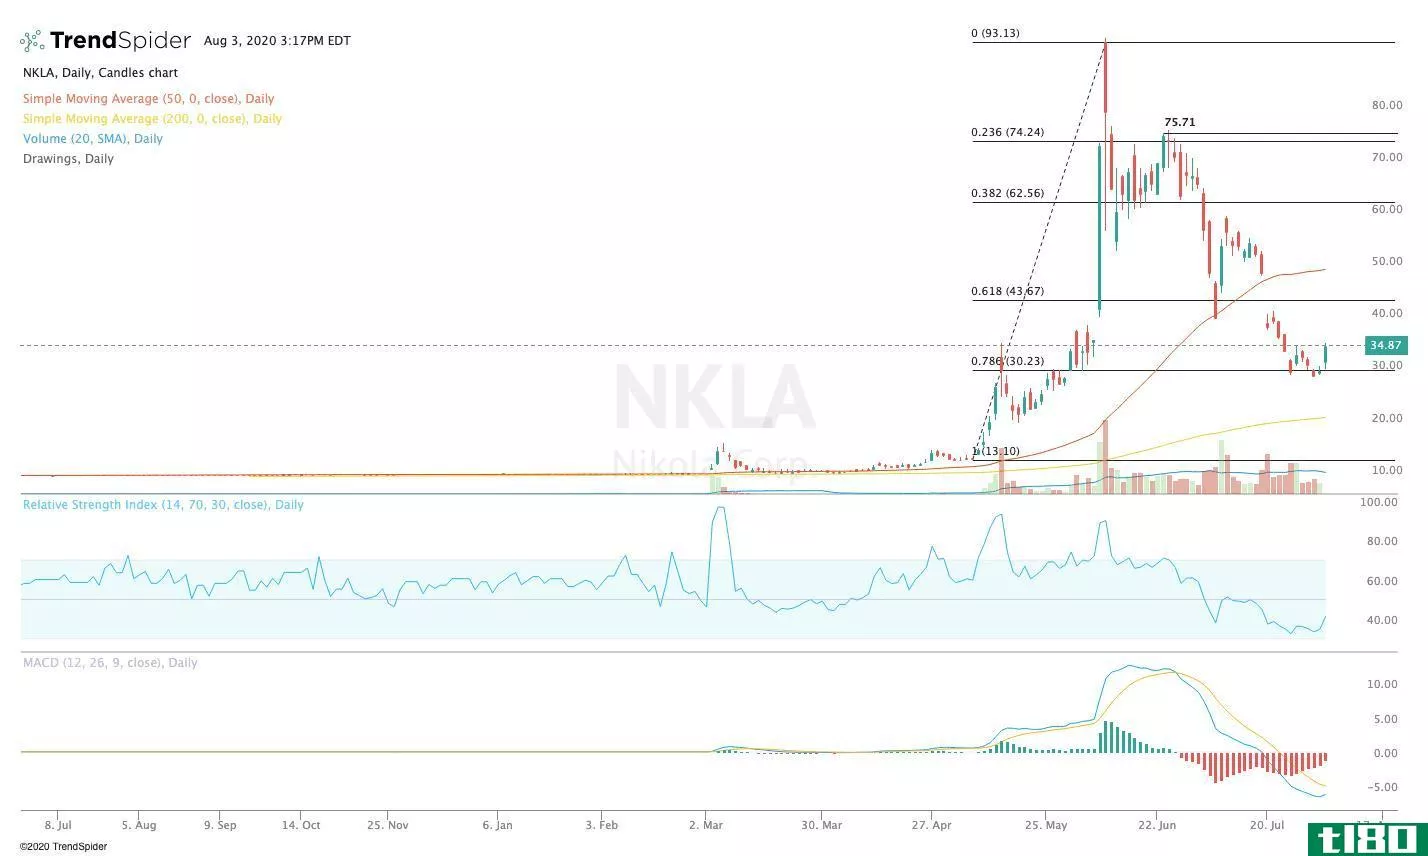 Chart showing the share price performance of Nikola Inc. (NKLA)